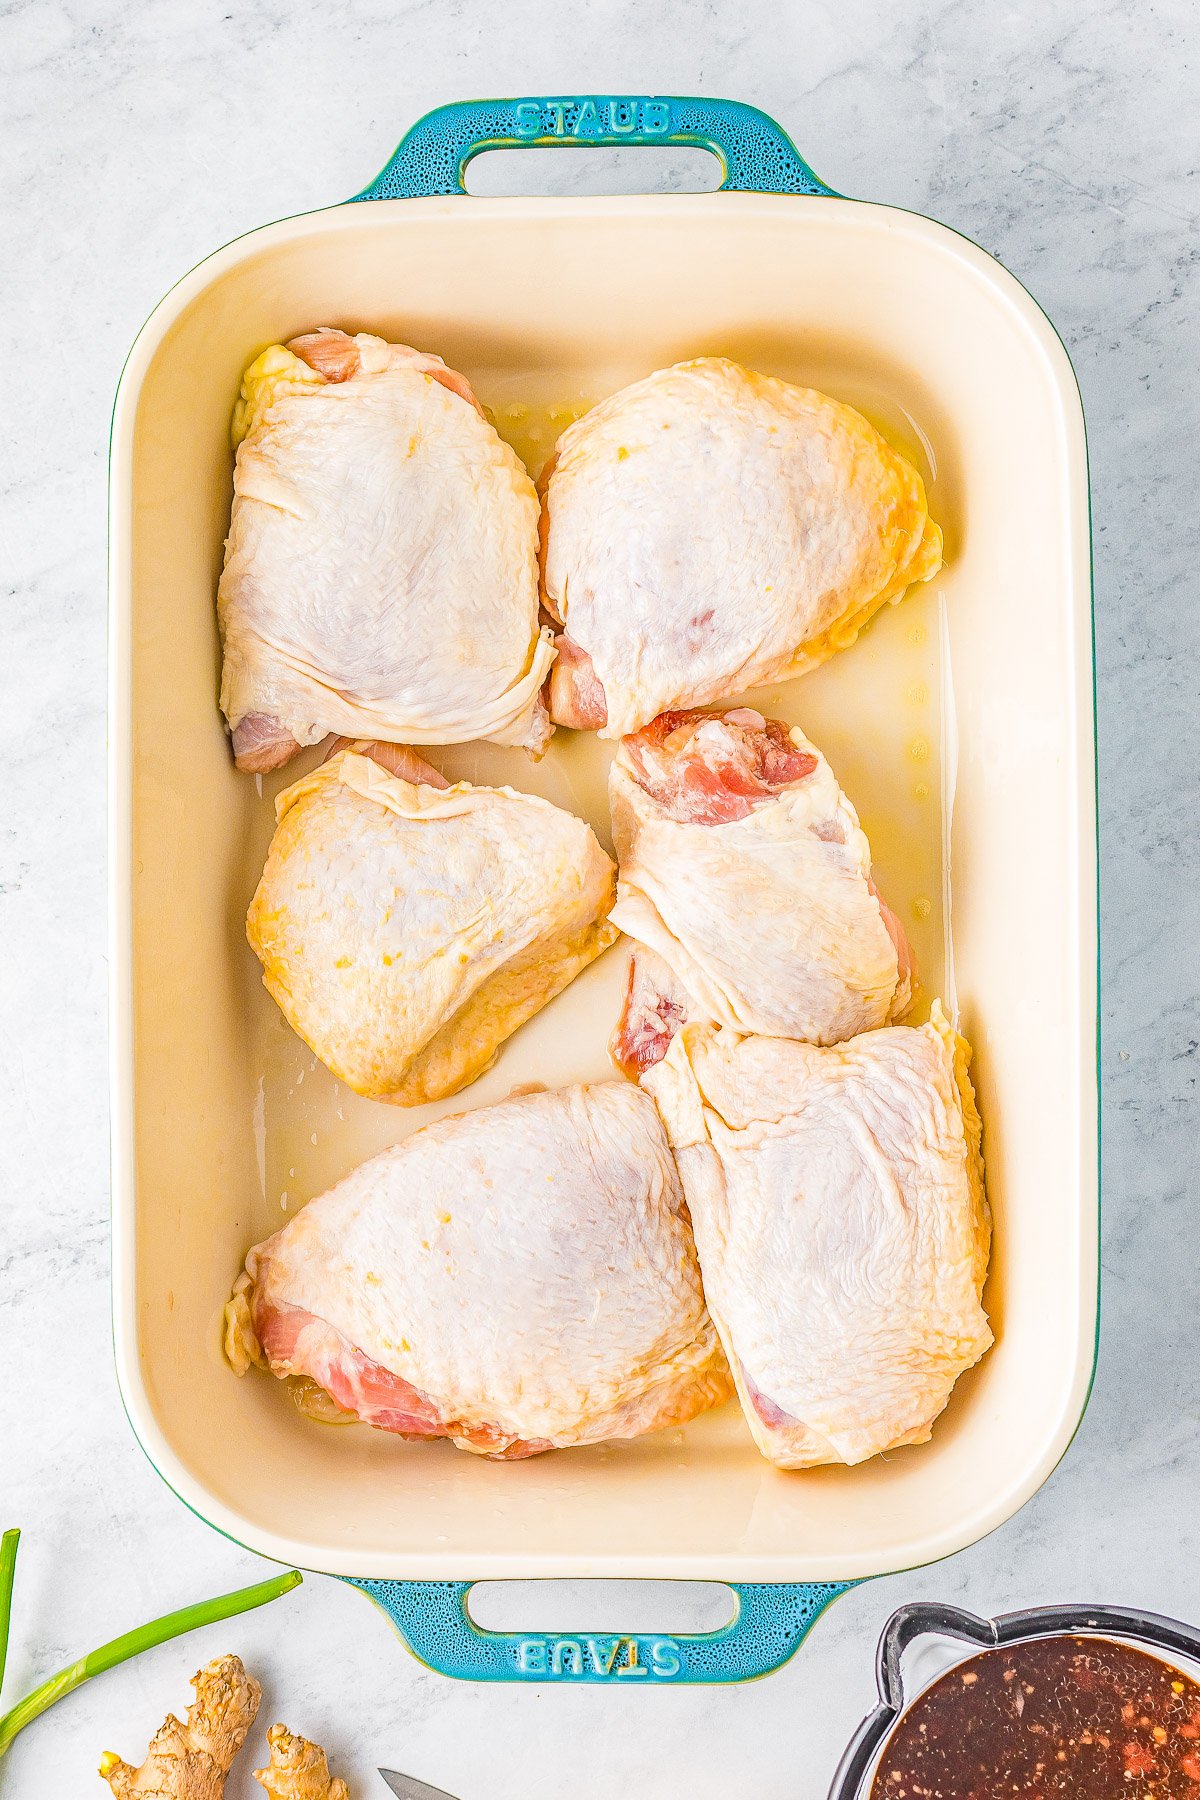 Honey Soy Baked Chicken Thighs - The chicken marinates in the most delectable mixture of soy sauce, honey, garlic, ginger, and more. The resulting baked chicken is SO tender, juicy, moist, and loaded with Asian-inspired flavors! Even better, this is a one-pan, EASY recipe the whole family will adore!